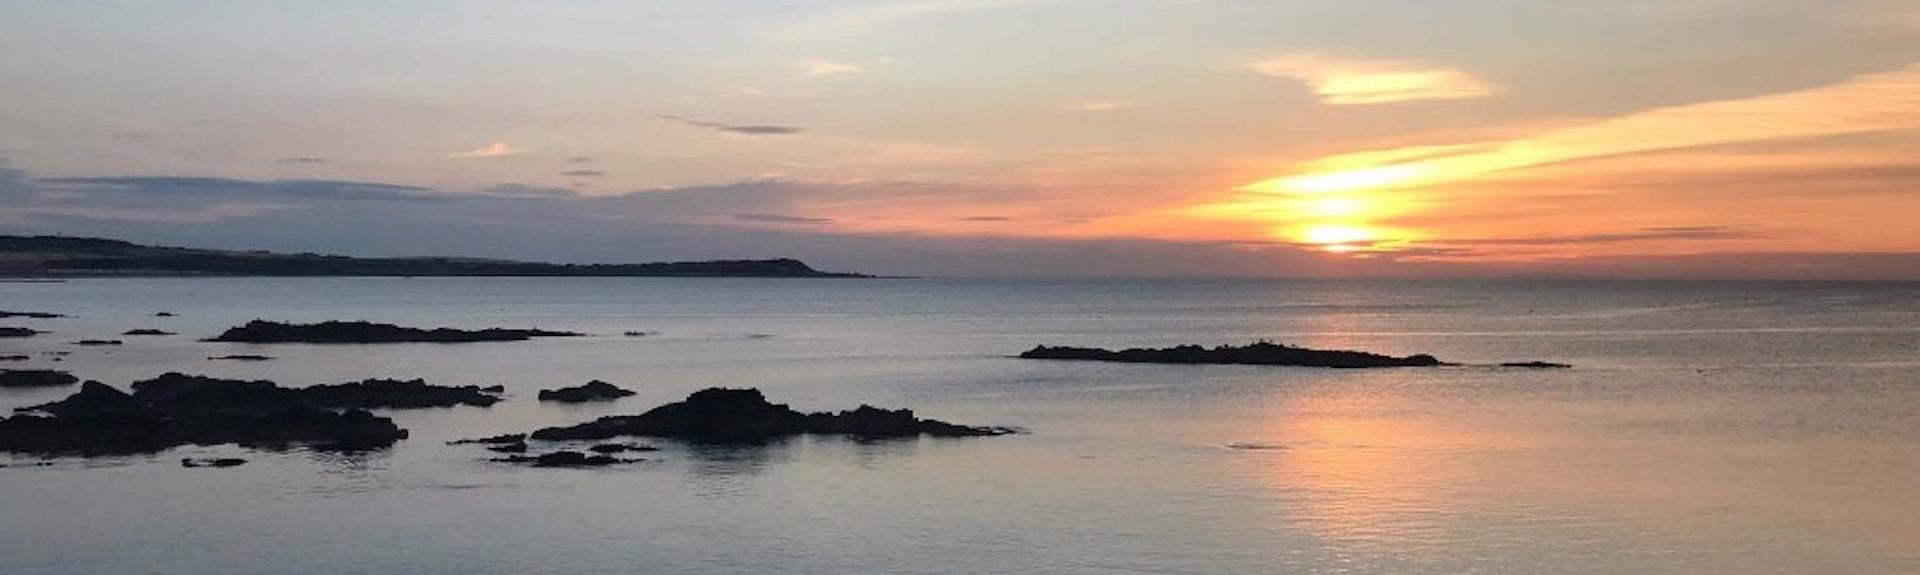 Sunset over The Moray Firth, a calm sea reflecting the sinking sun with tiny rocky islands silhouetted against the darkening sky.